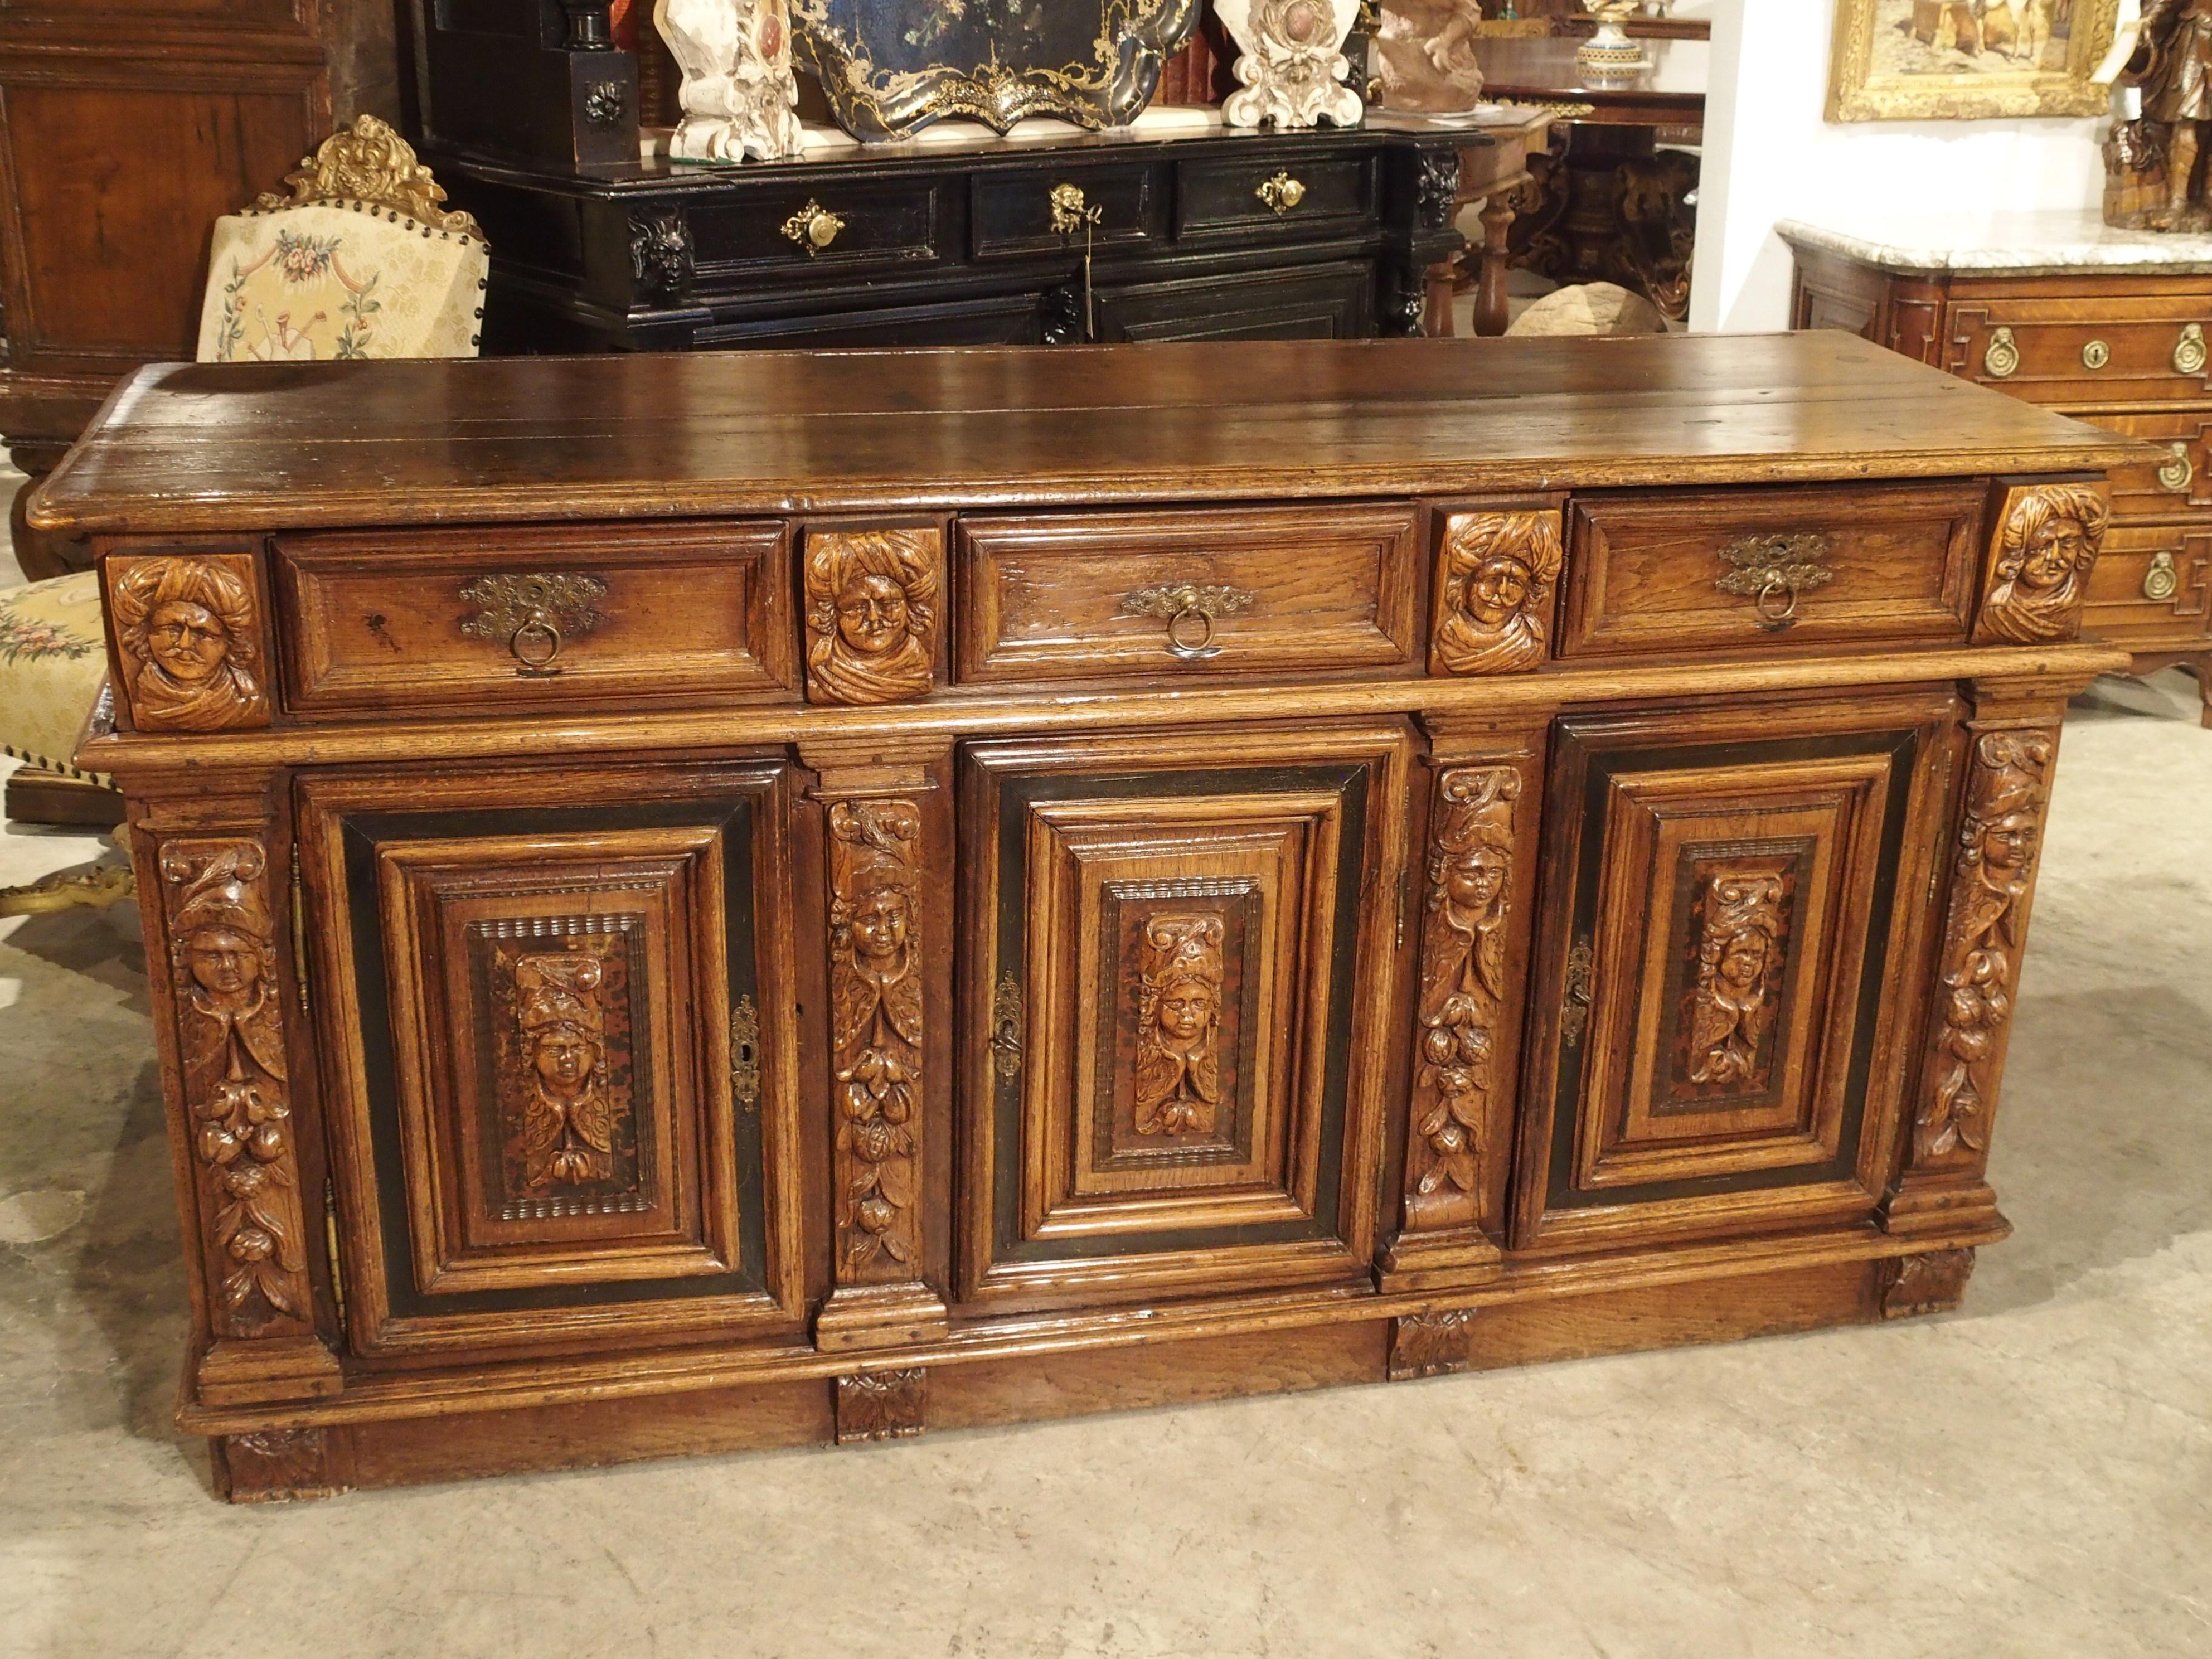 Rare 17th Century Oak Enfilade with Tortoiseshell and Ebony Inlays For Sale 5